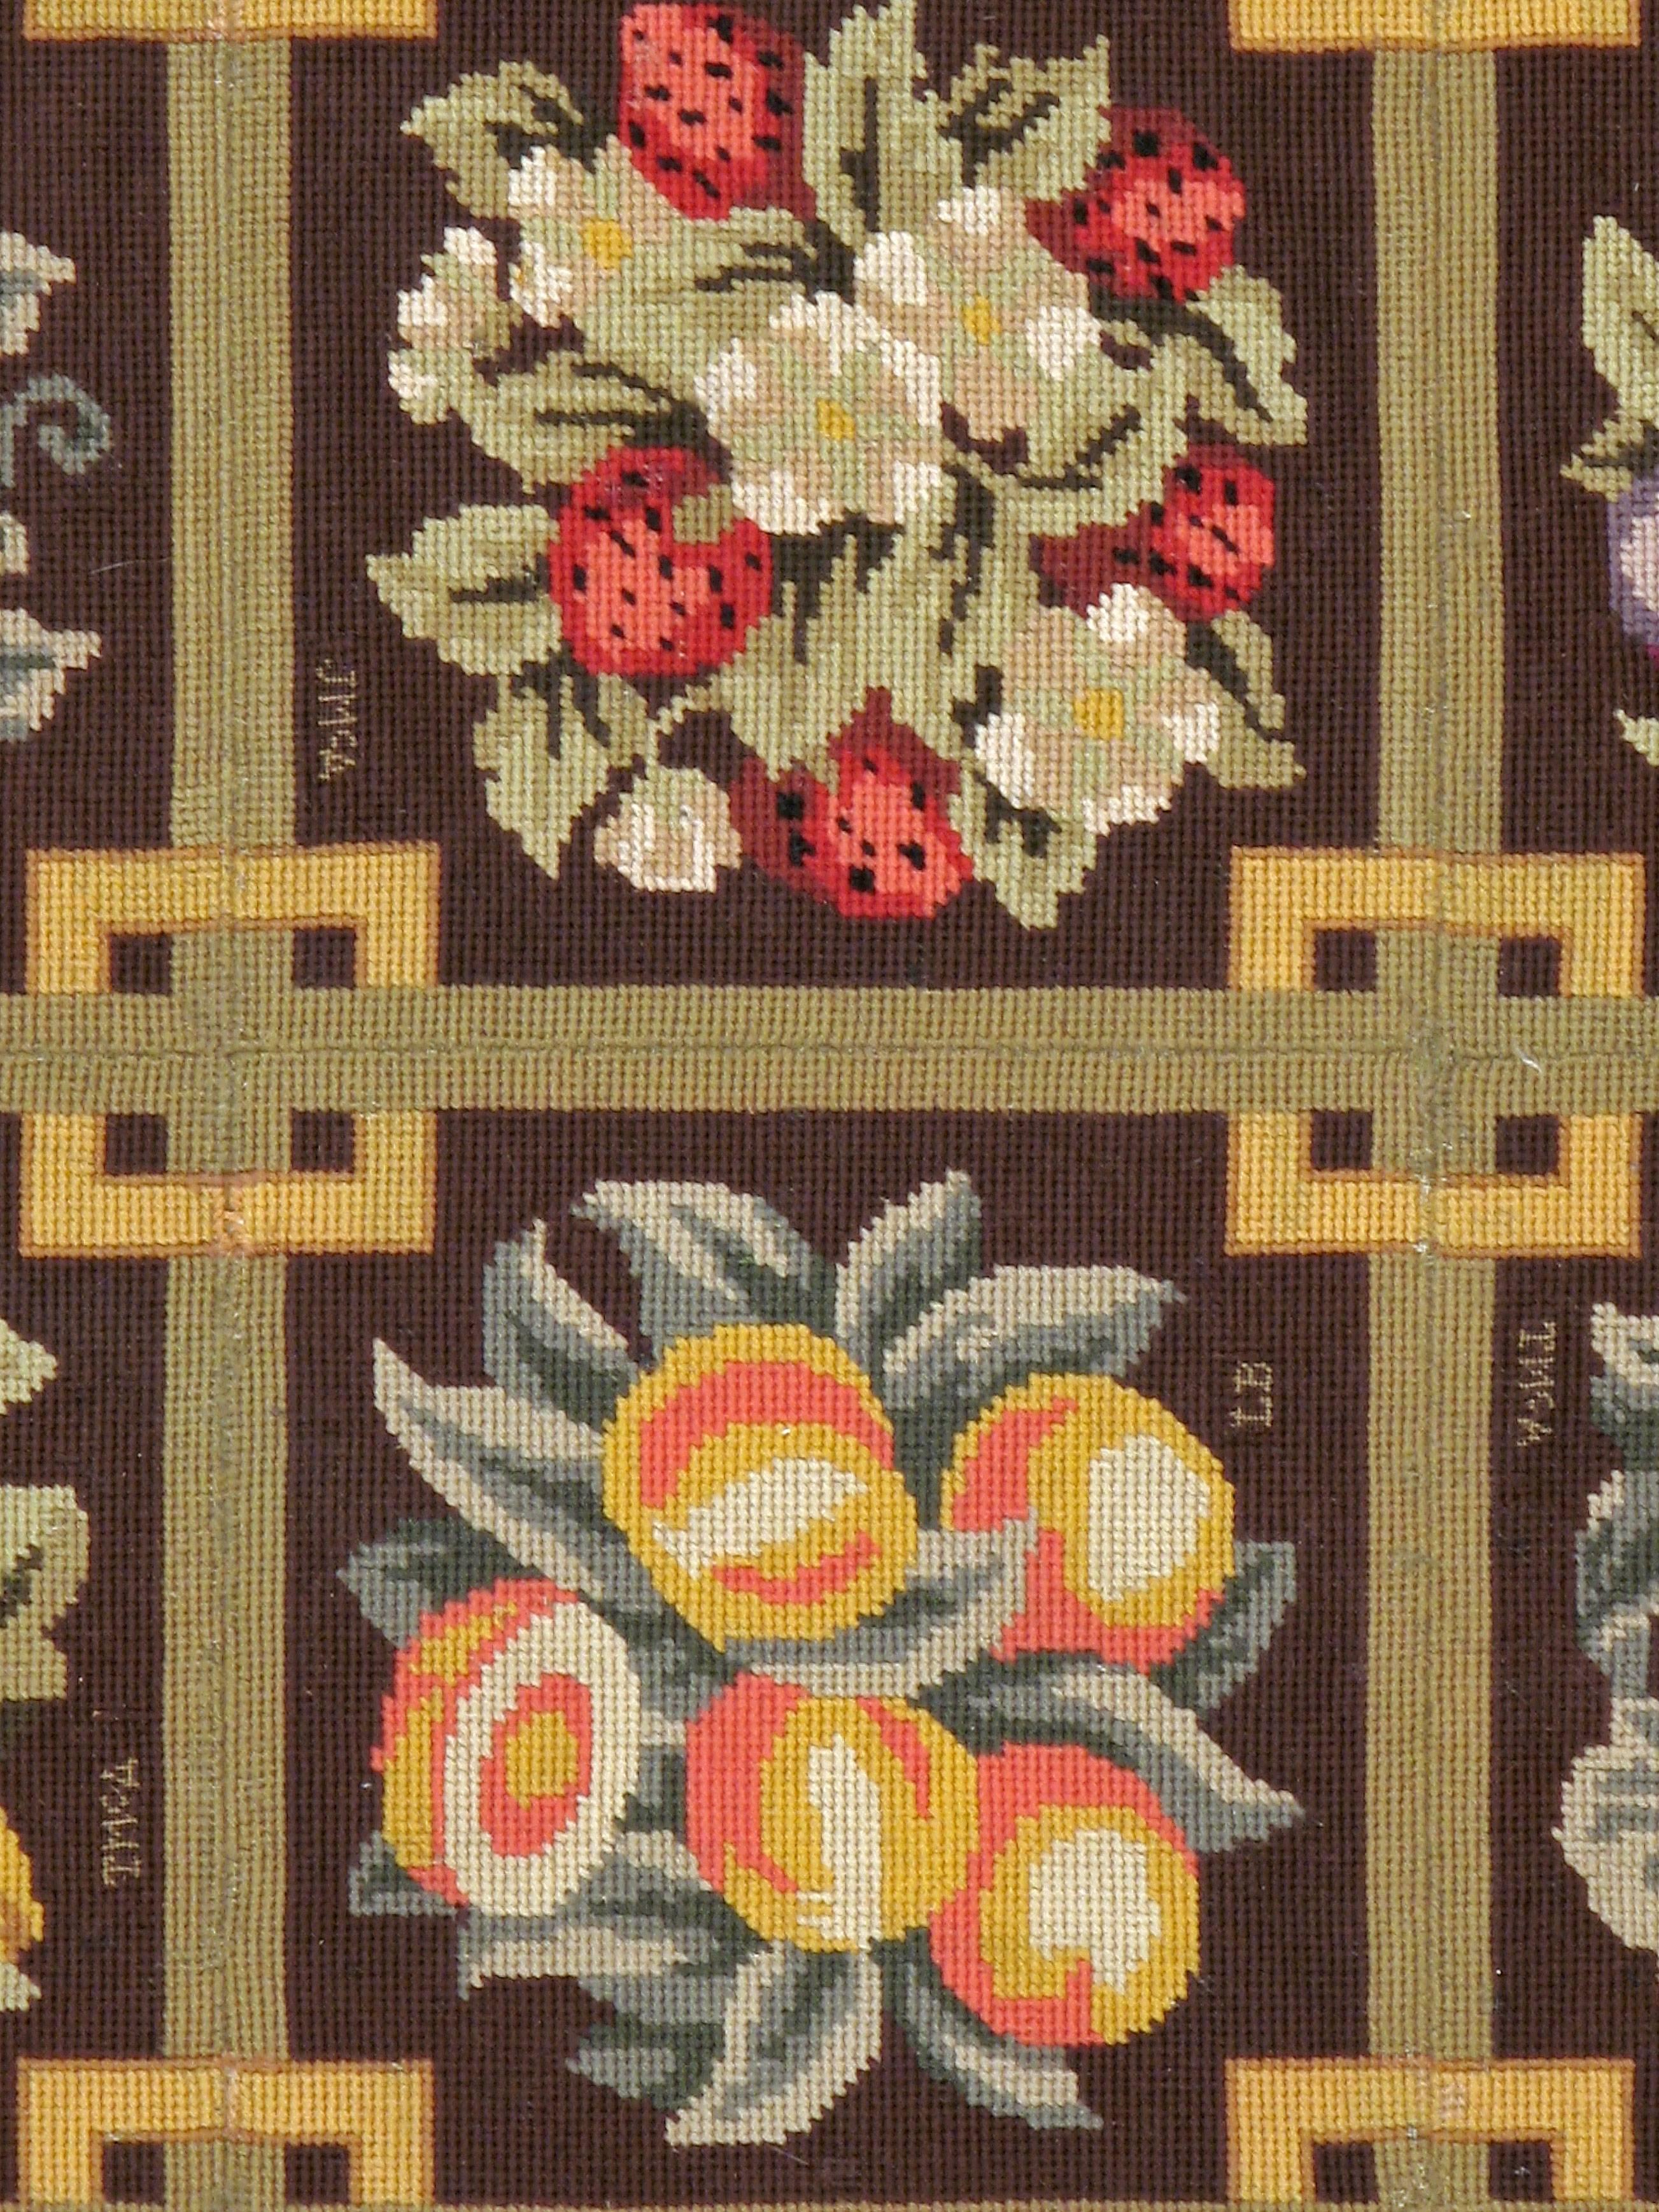 A vintage English needlepoint carpet from the mid-20th century.